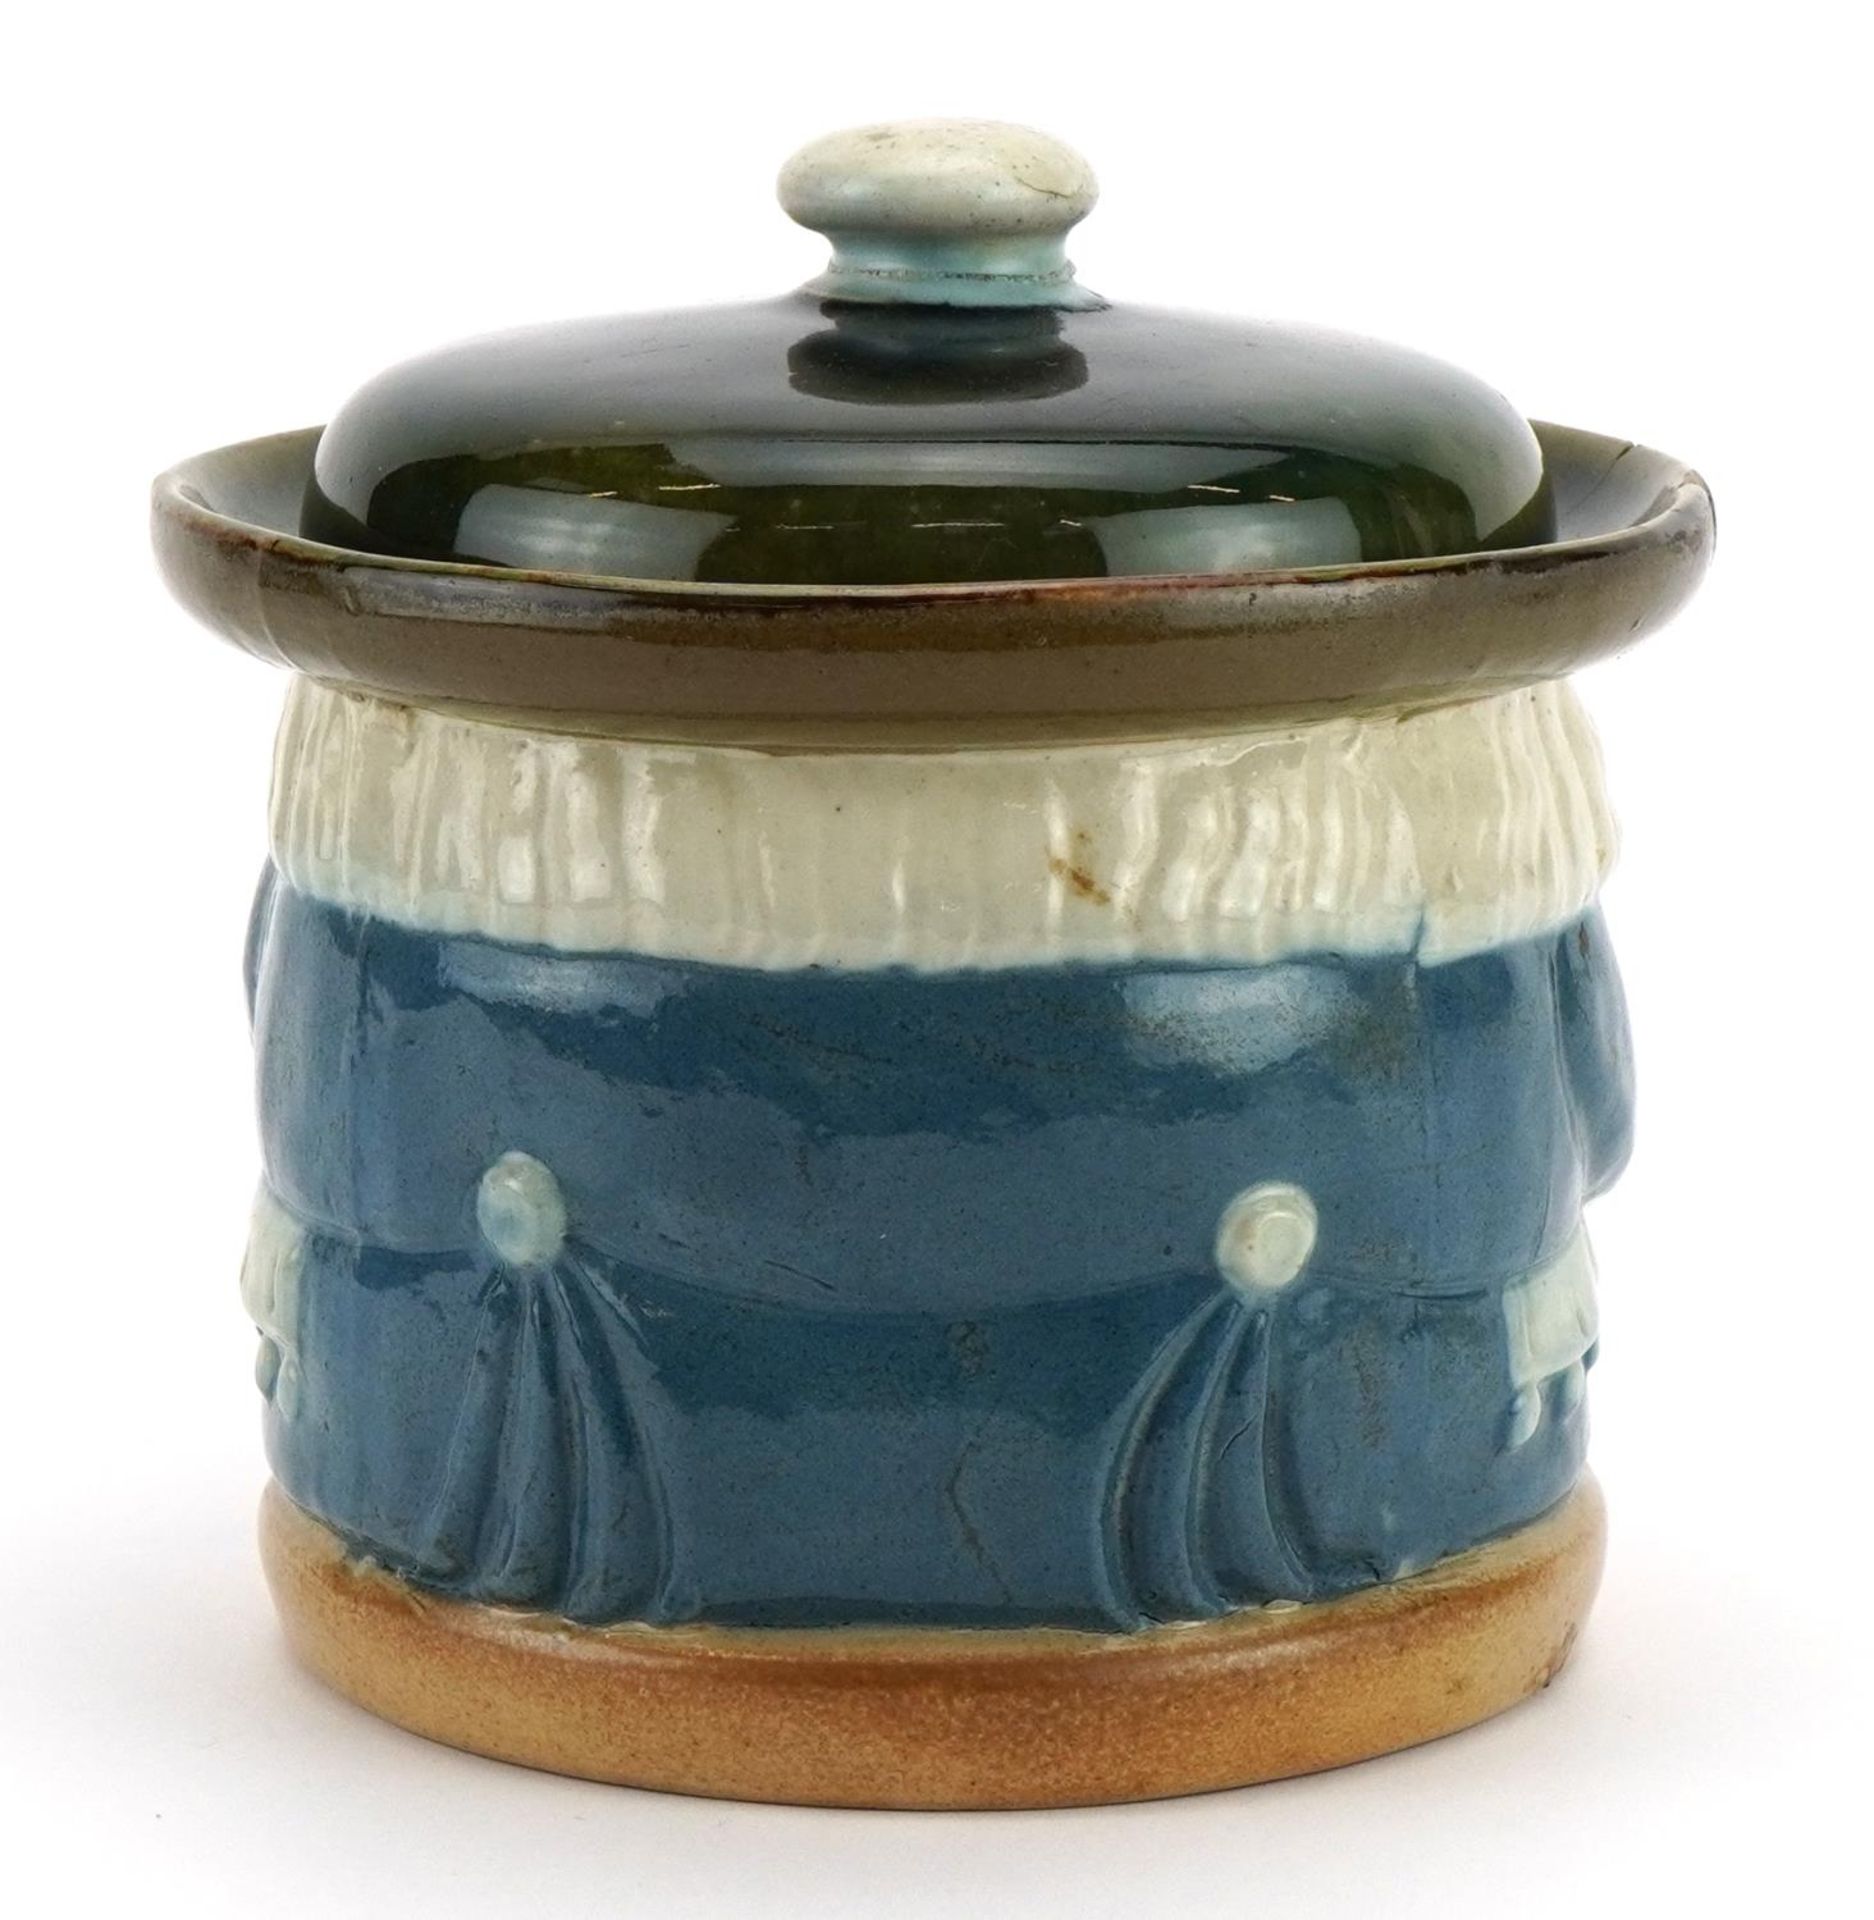 Harry Simeon for Royal Doulton, stoneware Toby design tobacco jar, impressed marks to the base, 13cm - Image 2 of 4